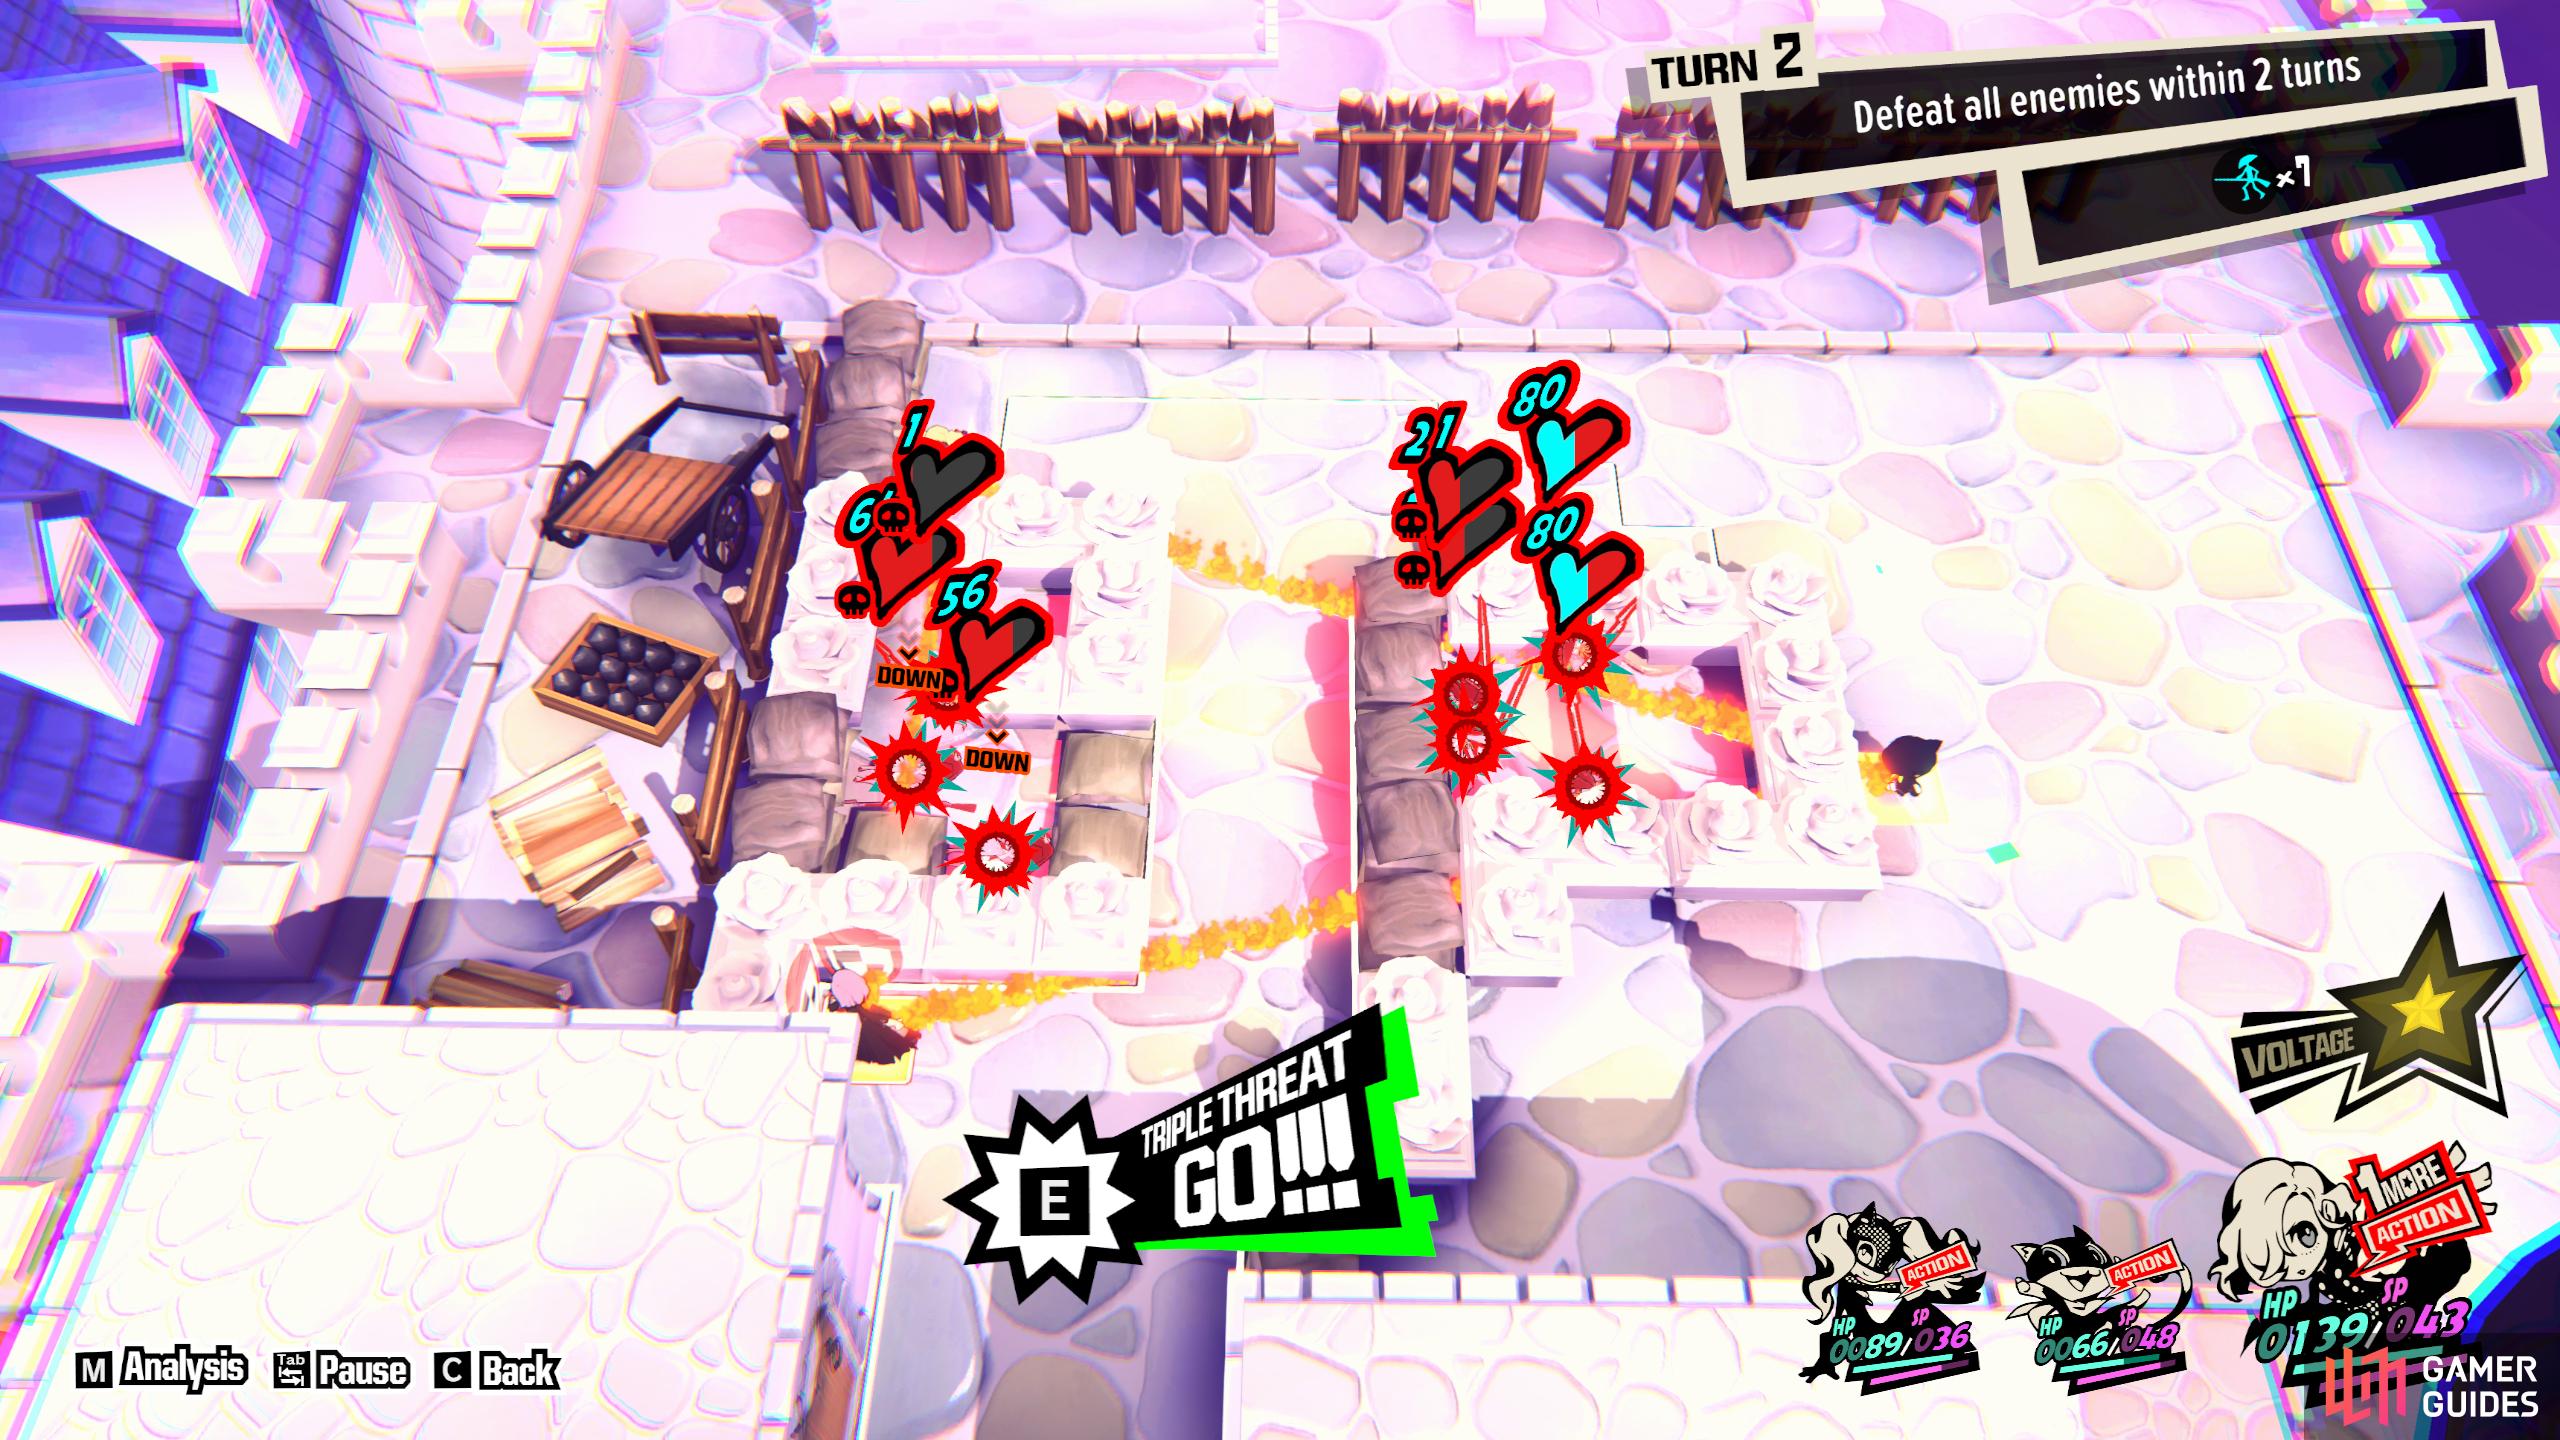 Now, create an All-Out-Attack by placing your squad in these positions. This will wipe out 90% of the enemies.